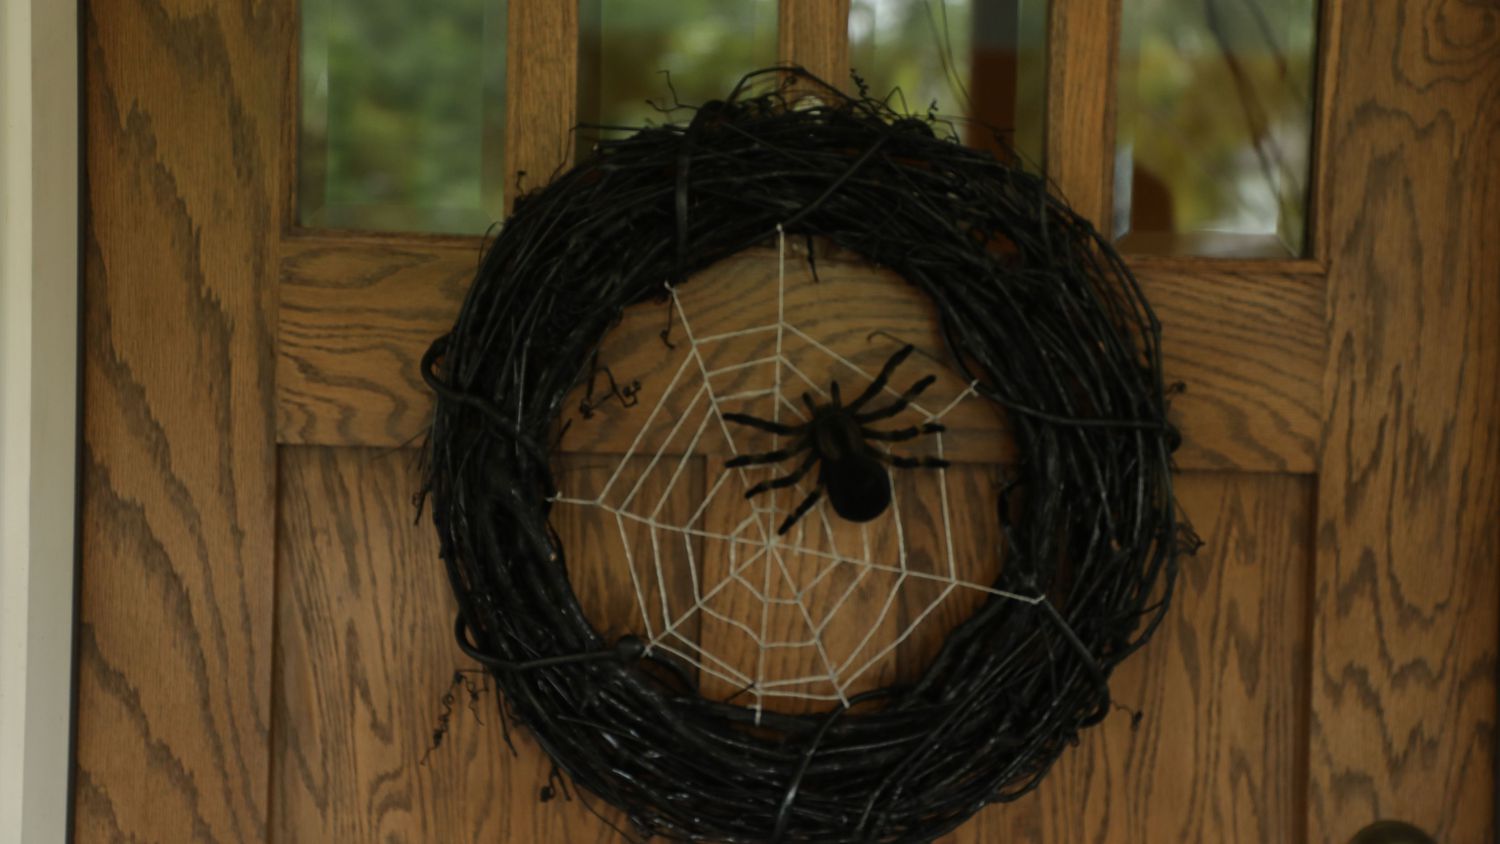 One of a Kind Wreath for Halloween Halloween Wreath Halloween Gift Idea Halloween Wreath with Large Spider Spider Wreath Fall Decor